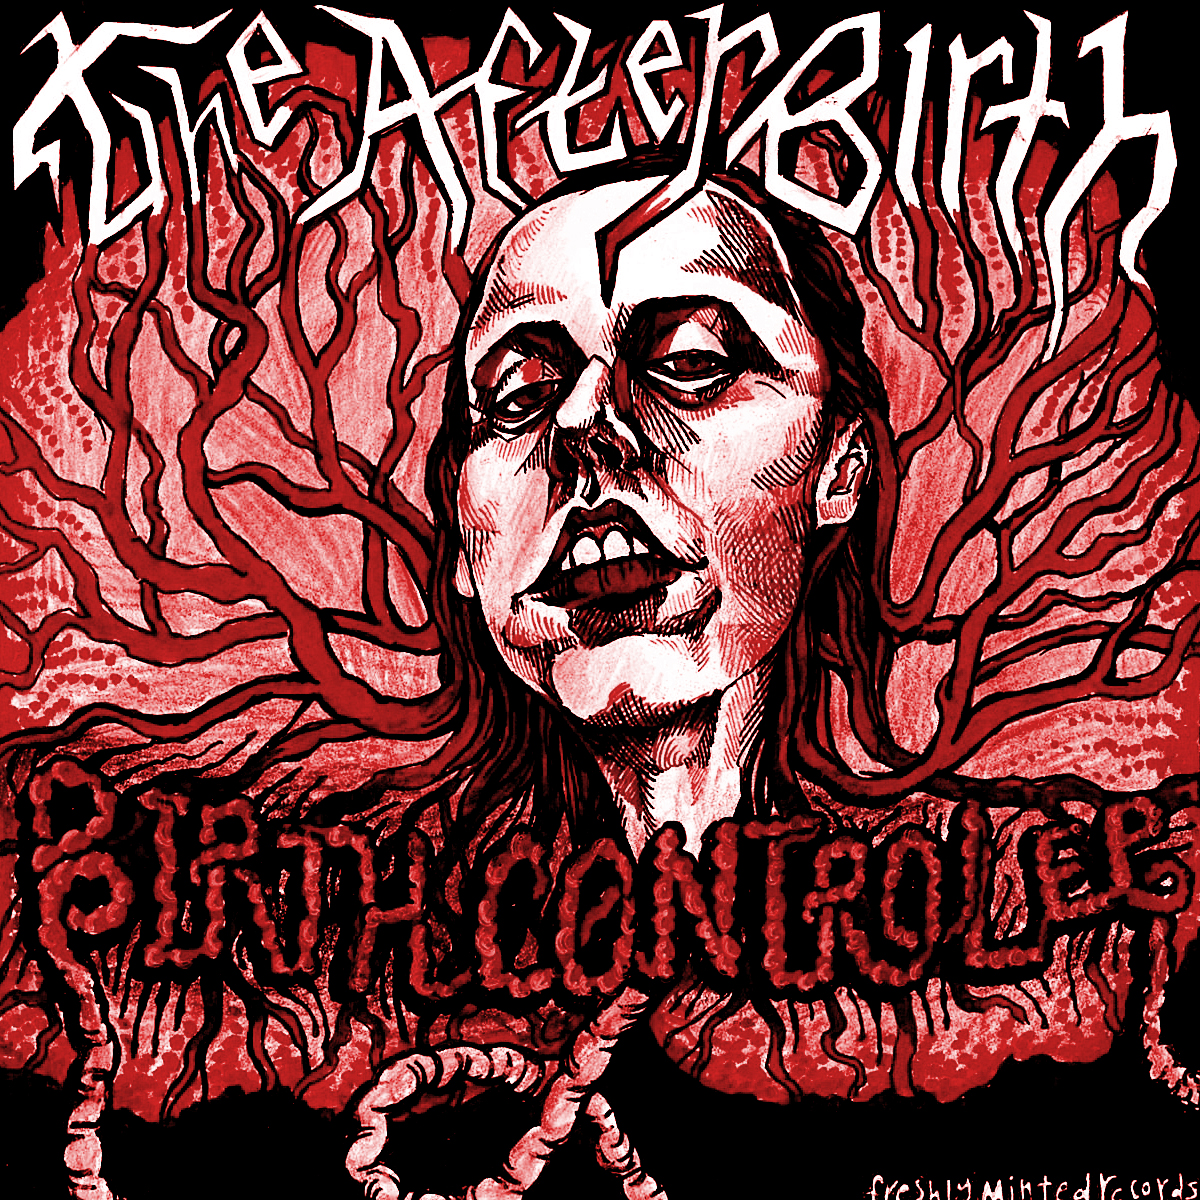 The Afterbirth “Birth Control EP” in stores now!